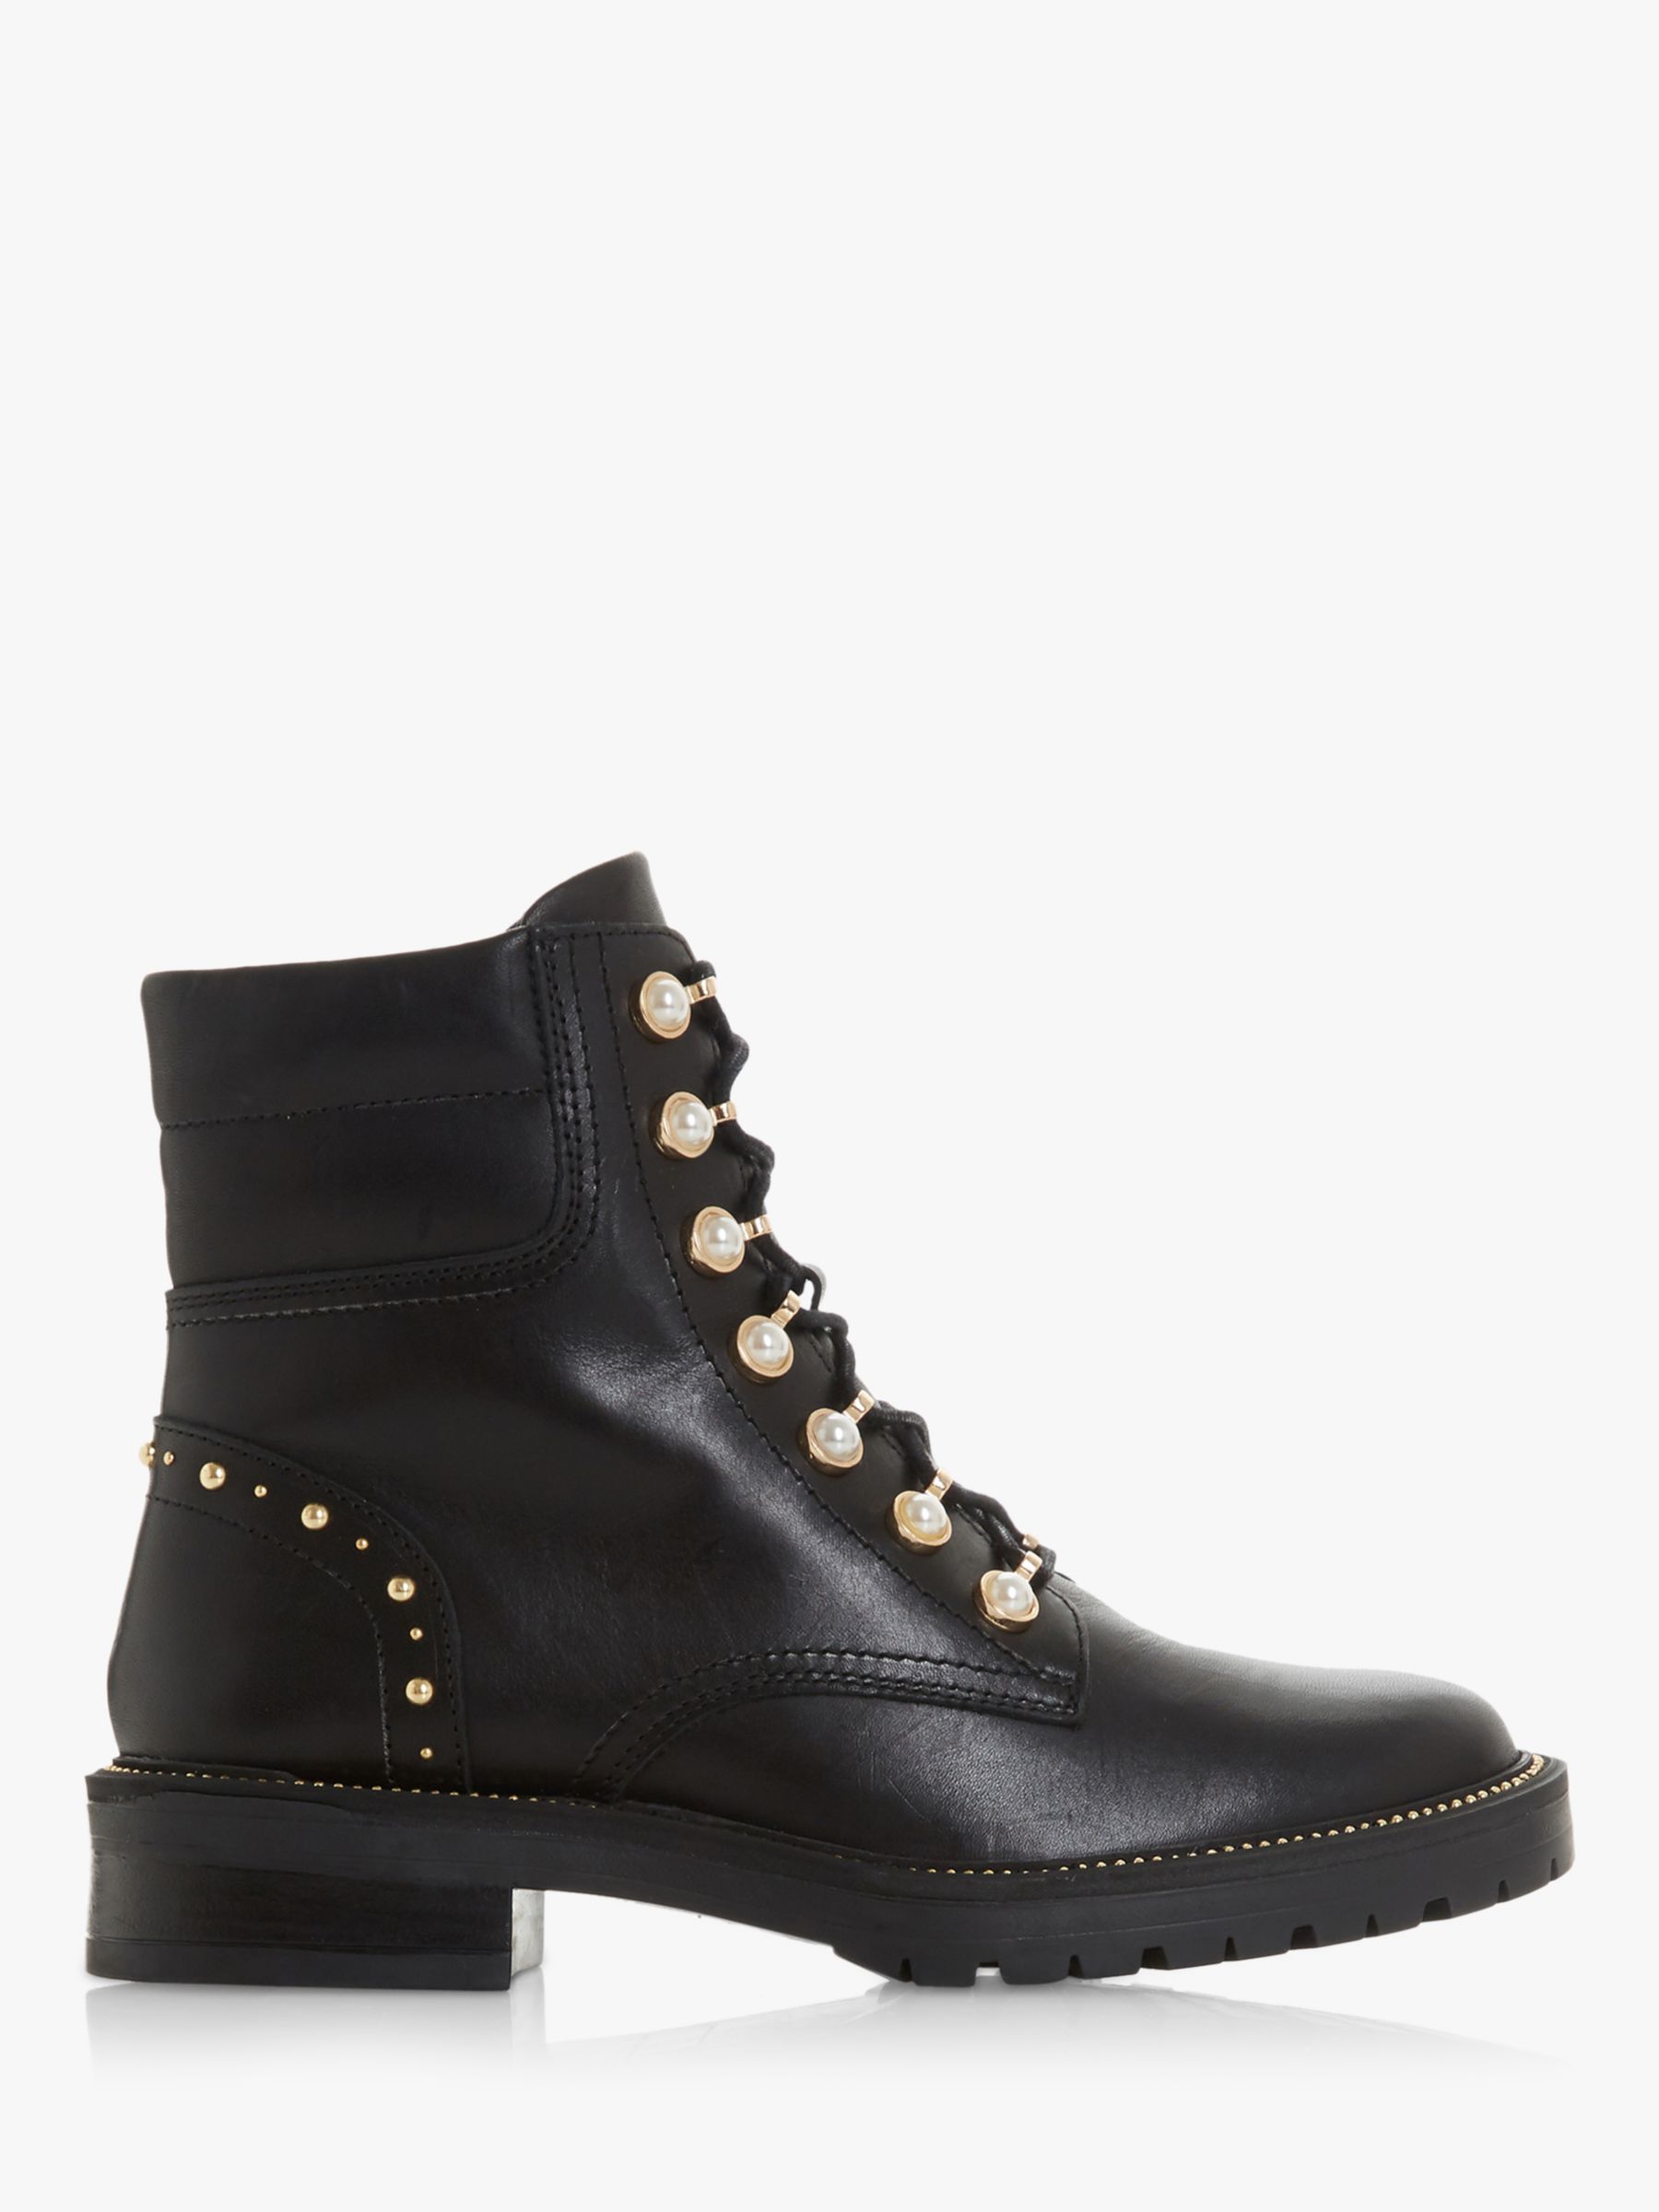 Dune Pearley Pearl Embellished Leather Hiker Boots, Black